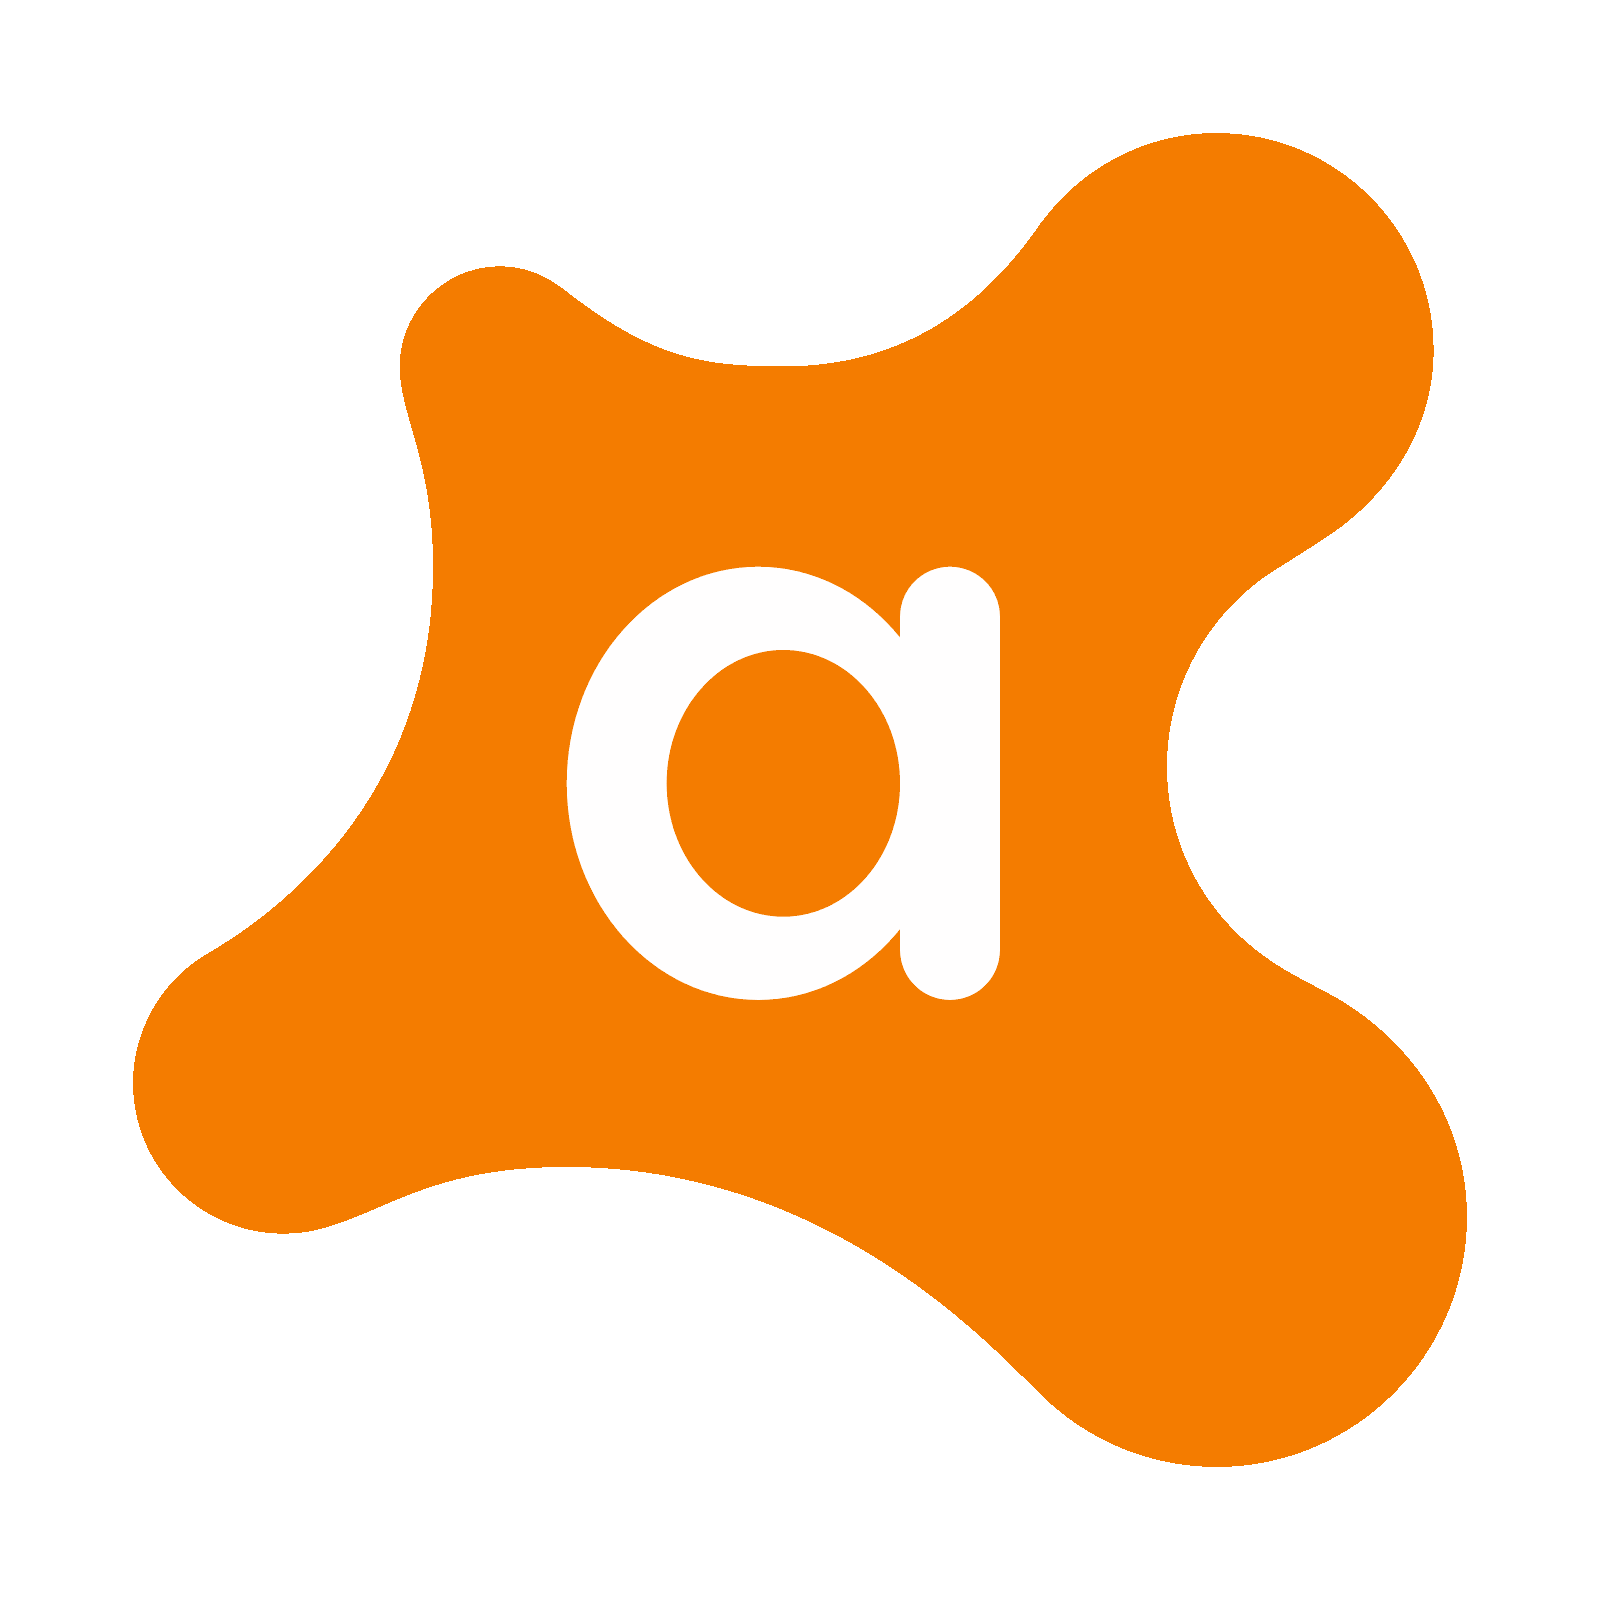 avast cleanup review